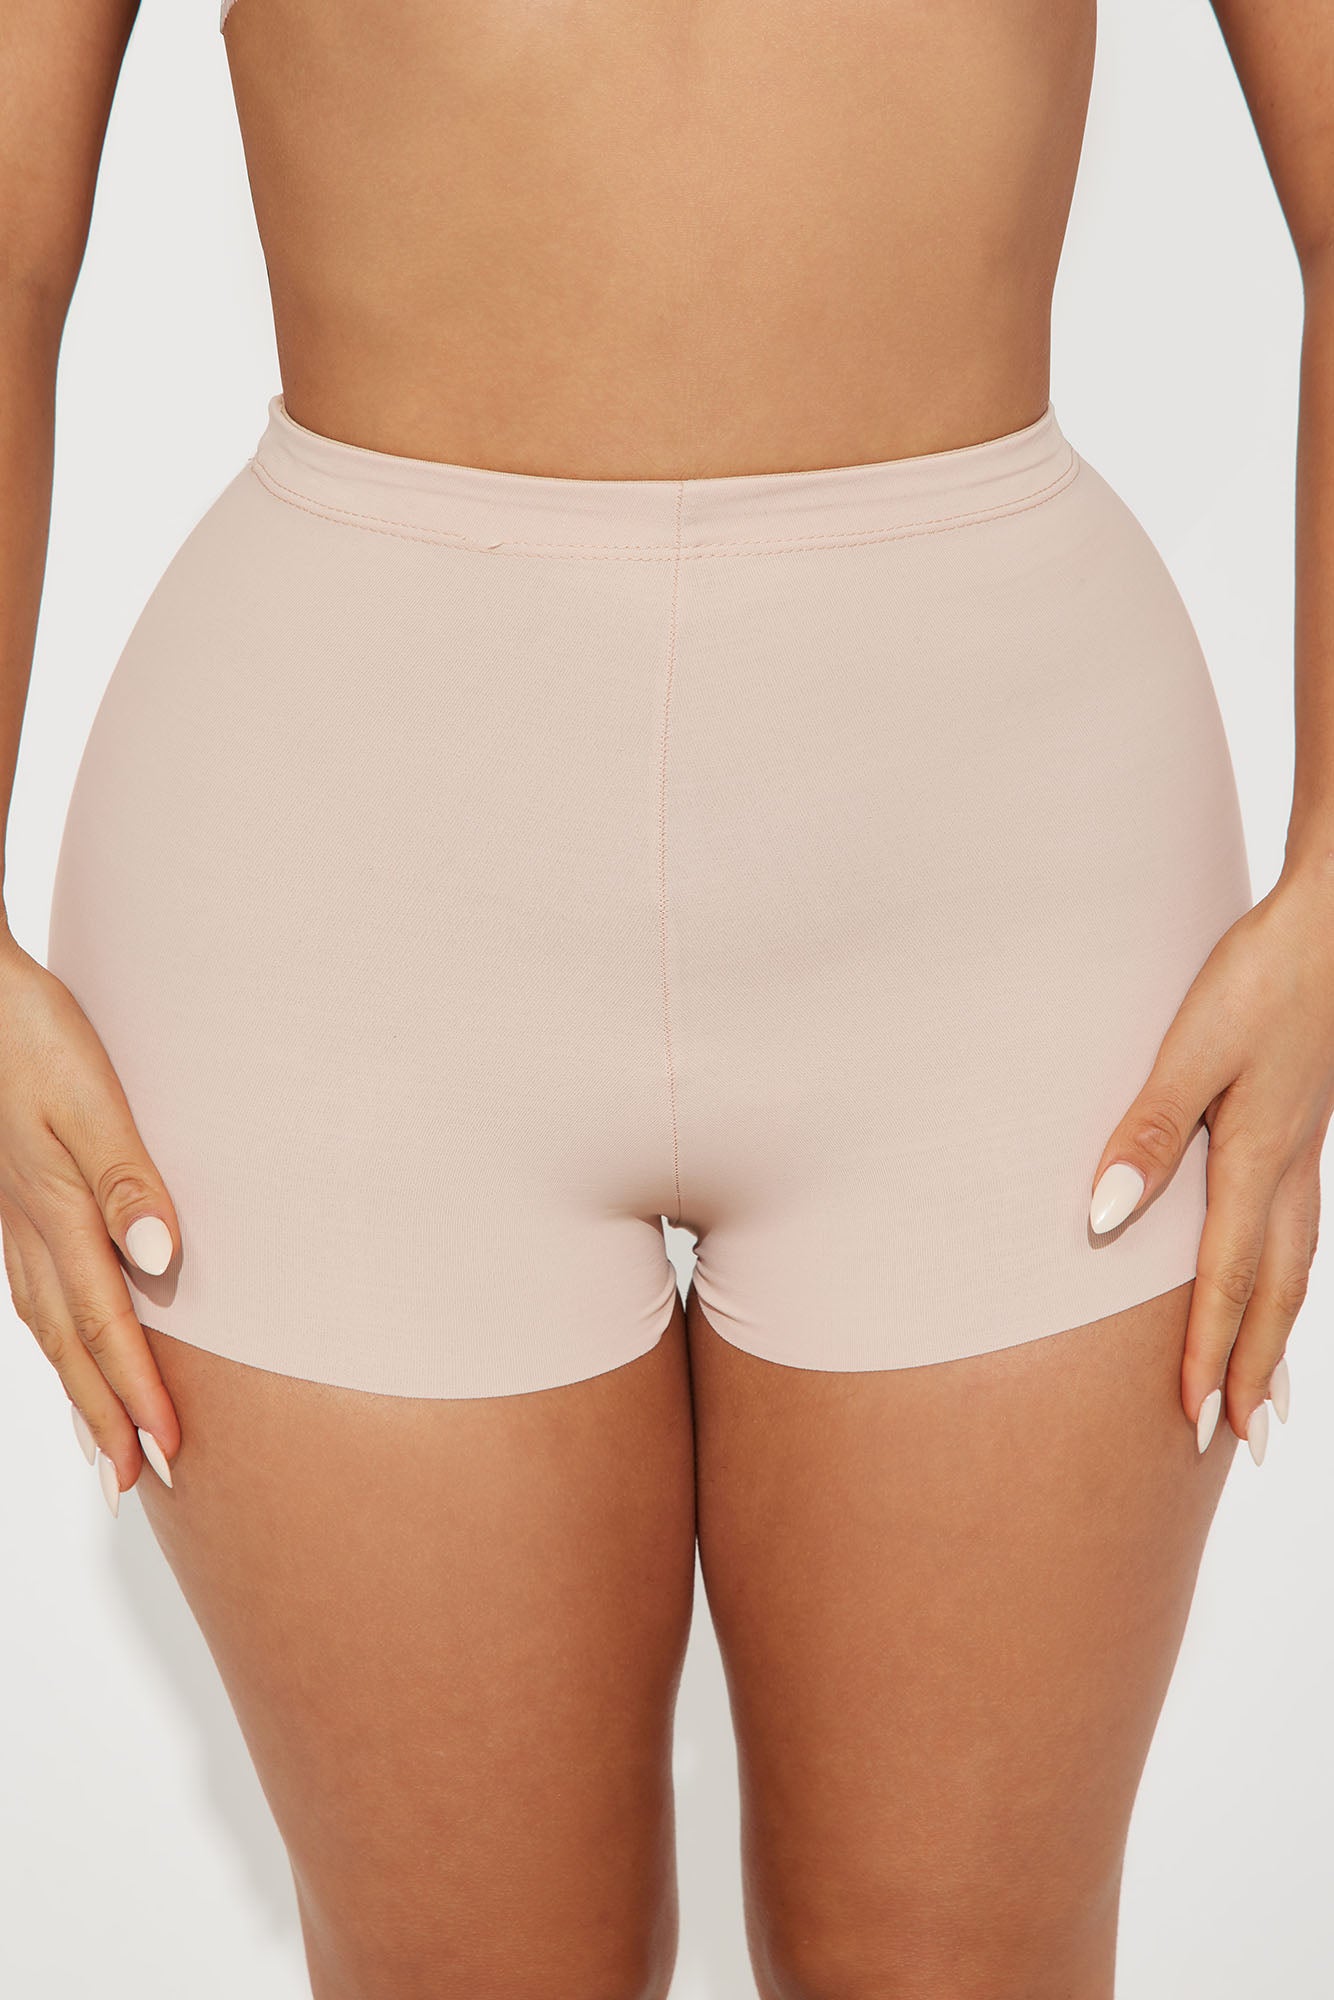 Nude Seamless Mid Waist Shaping Shorts for Women, Be Wicked